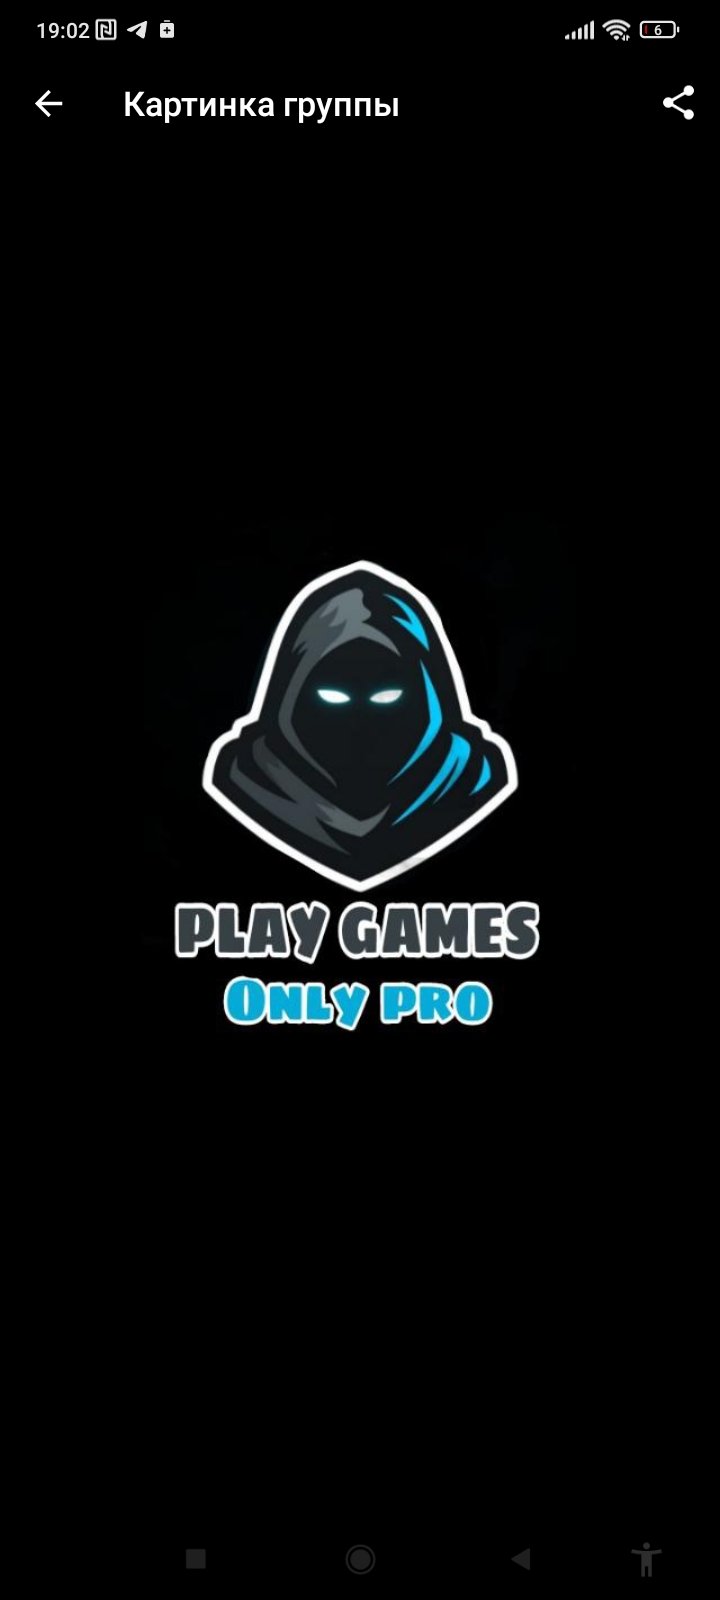 Play games Only Pro